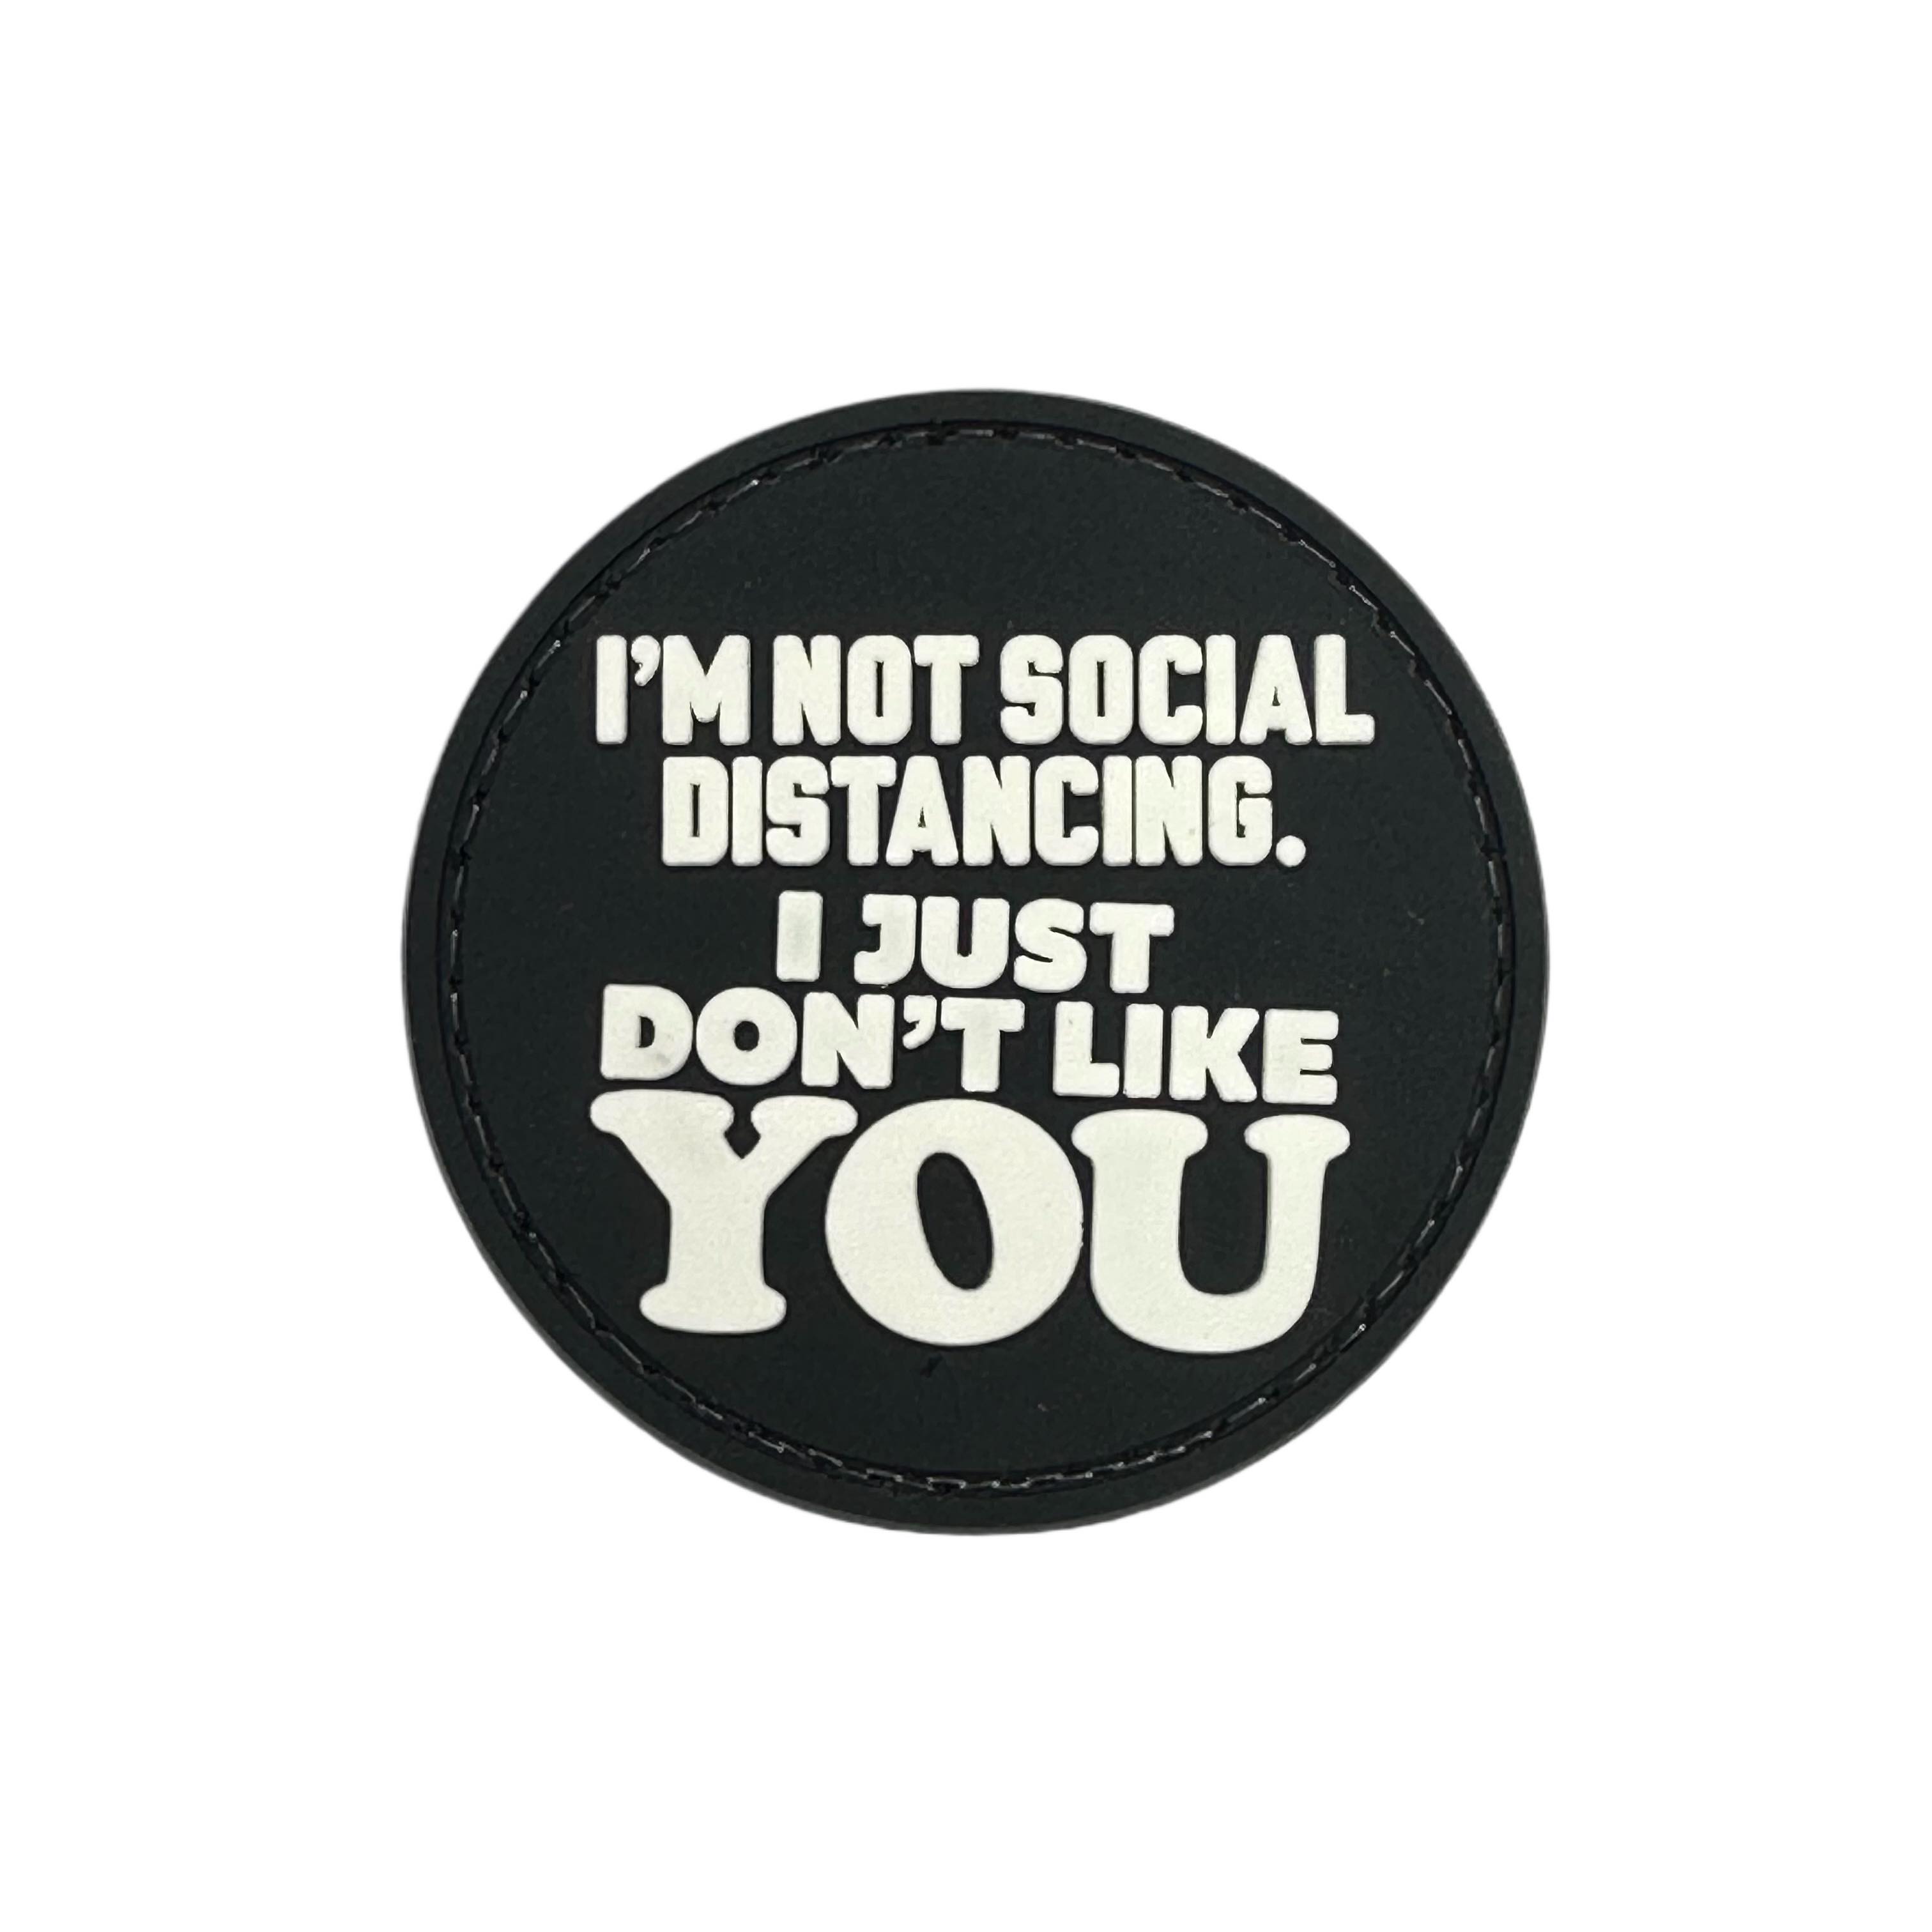 Rubber Patch - I'm Not Social Distancing I just don't like you